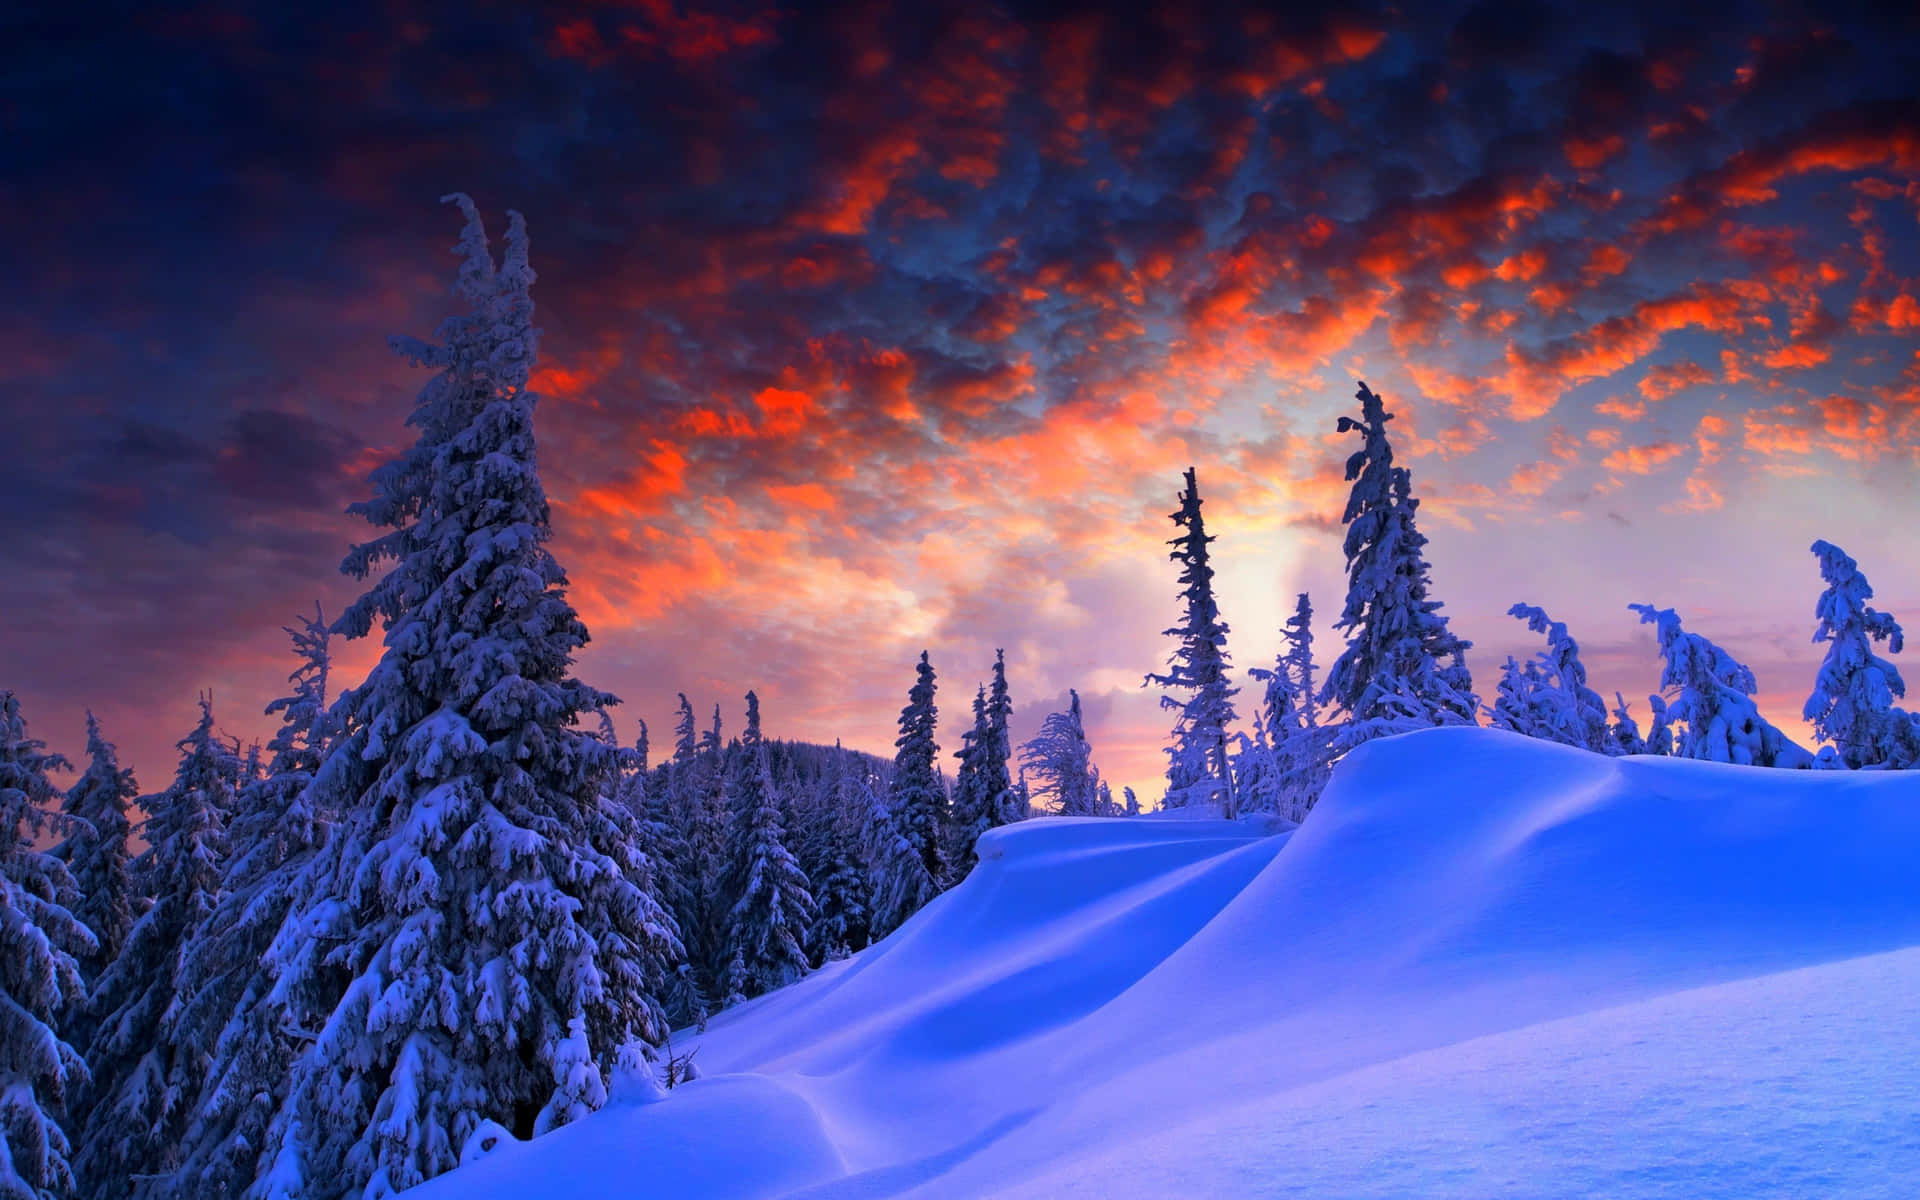 Enjoy the beauty of a winter landscape, blanketed with a fresh snowfall